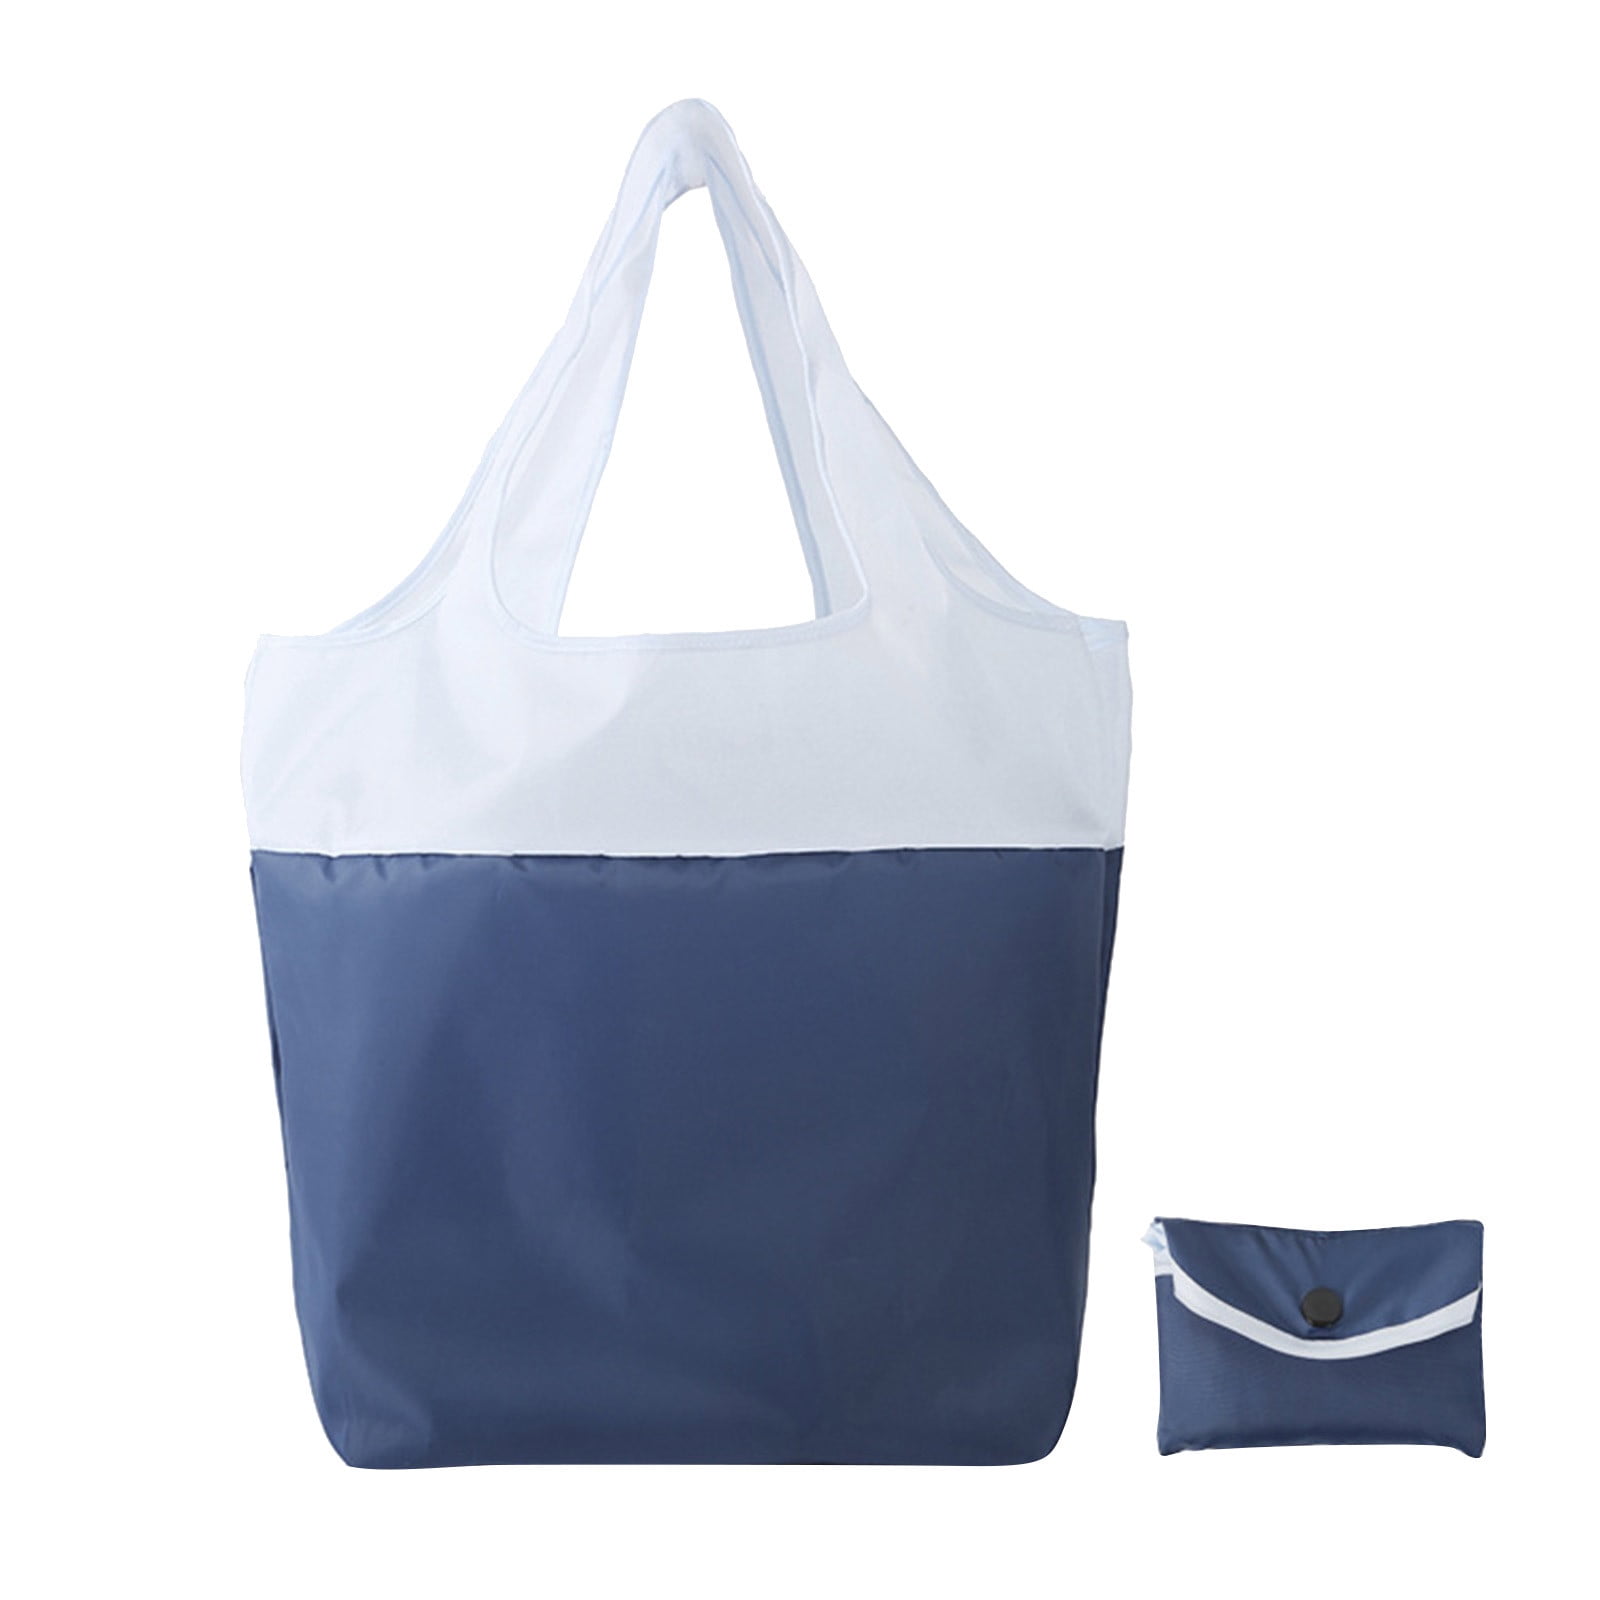 AnuirheiH Reusable Grocery Bags Foldable Washable Shopping Bags Folding Reusable Bags Tote Bag Storage Bag Lightweight Polyester Fabric 94f6f6fb 692c 4284 8a57 c73ab56bbb48.a20eff26305d165751a7fedfc4fcbe3c